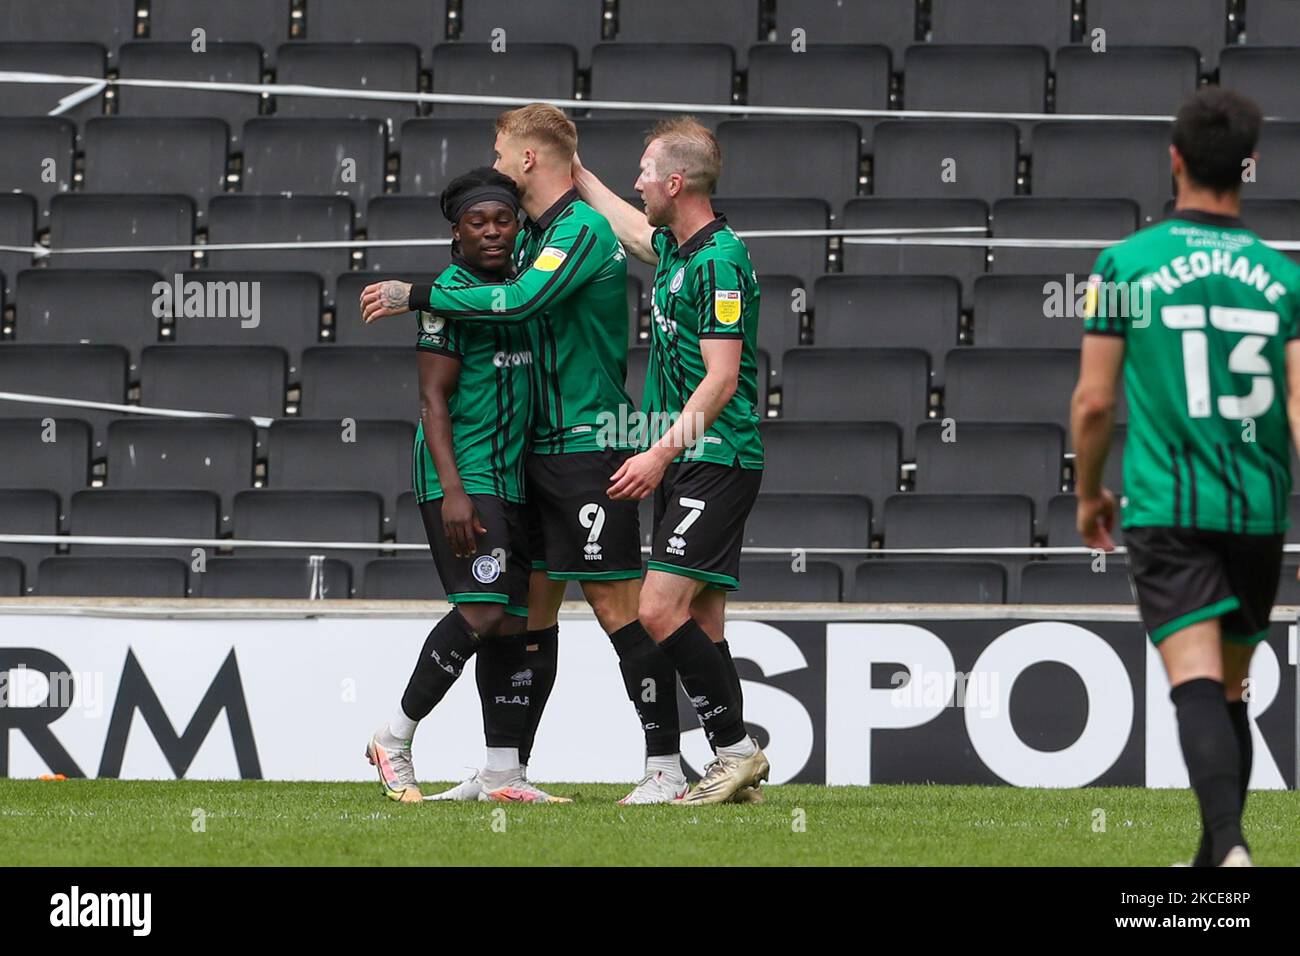 Stephen Humphrys celebrates with team mates after scoring for Rochdale, to extend their lead to make it 3 - 0 against Milton Keynes Dons, during the Sky Bet League One match between MK Dons and Rochdale at Stadium MK, Milton Keynes, UK on 9th May 2021. (Photo by John Cripps/MI News/NurPhoto) Stock Photo